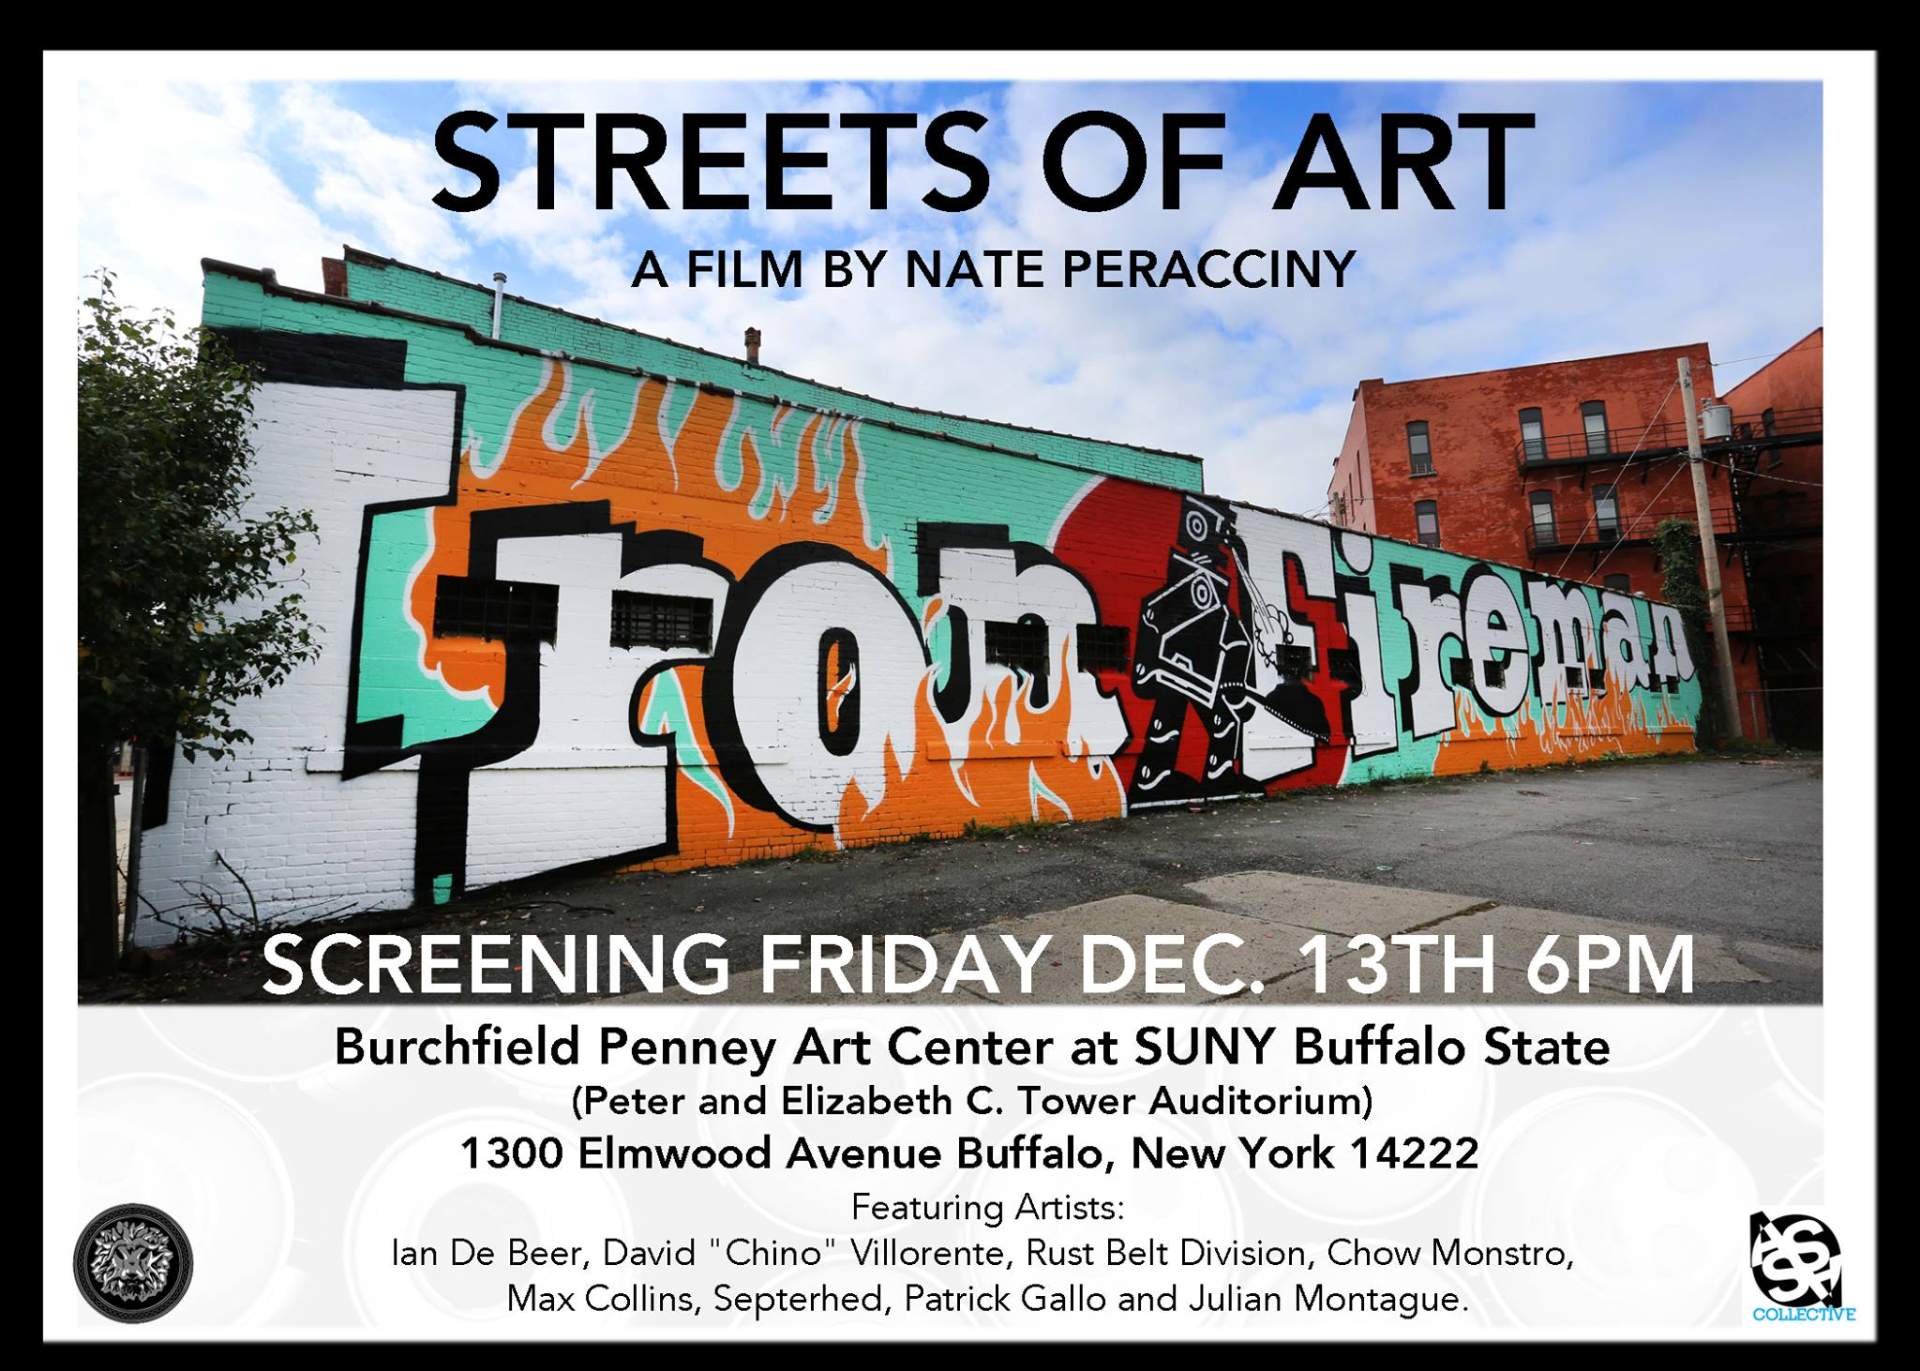 Streets of Art: A New film by Nate Peracciny